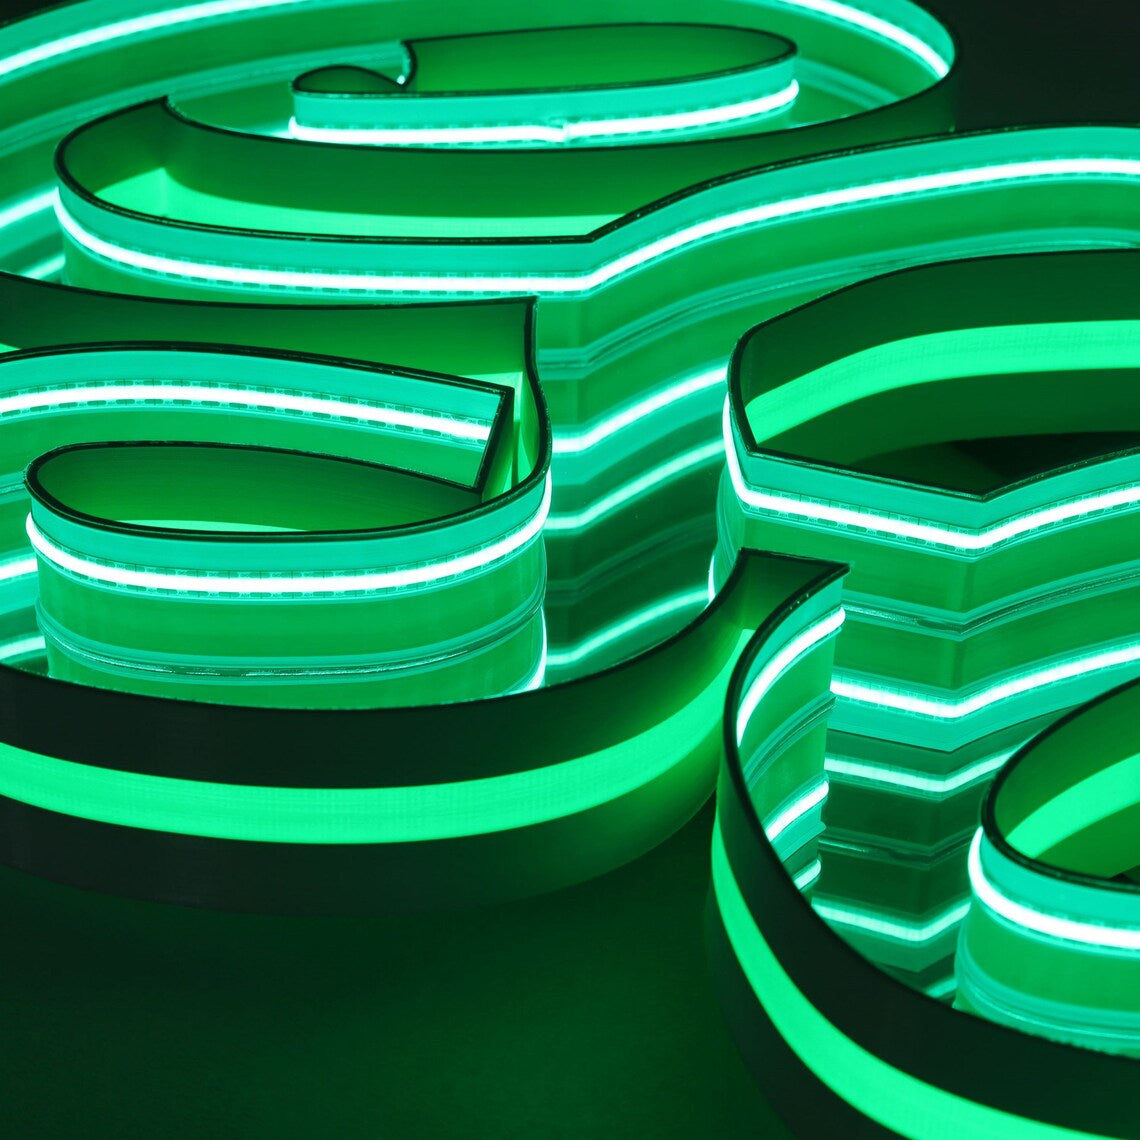 Custom 3D Infinity Mirror LED Light Sign - Personalized Channel Letters Sign